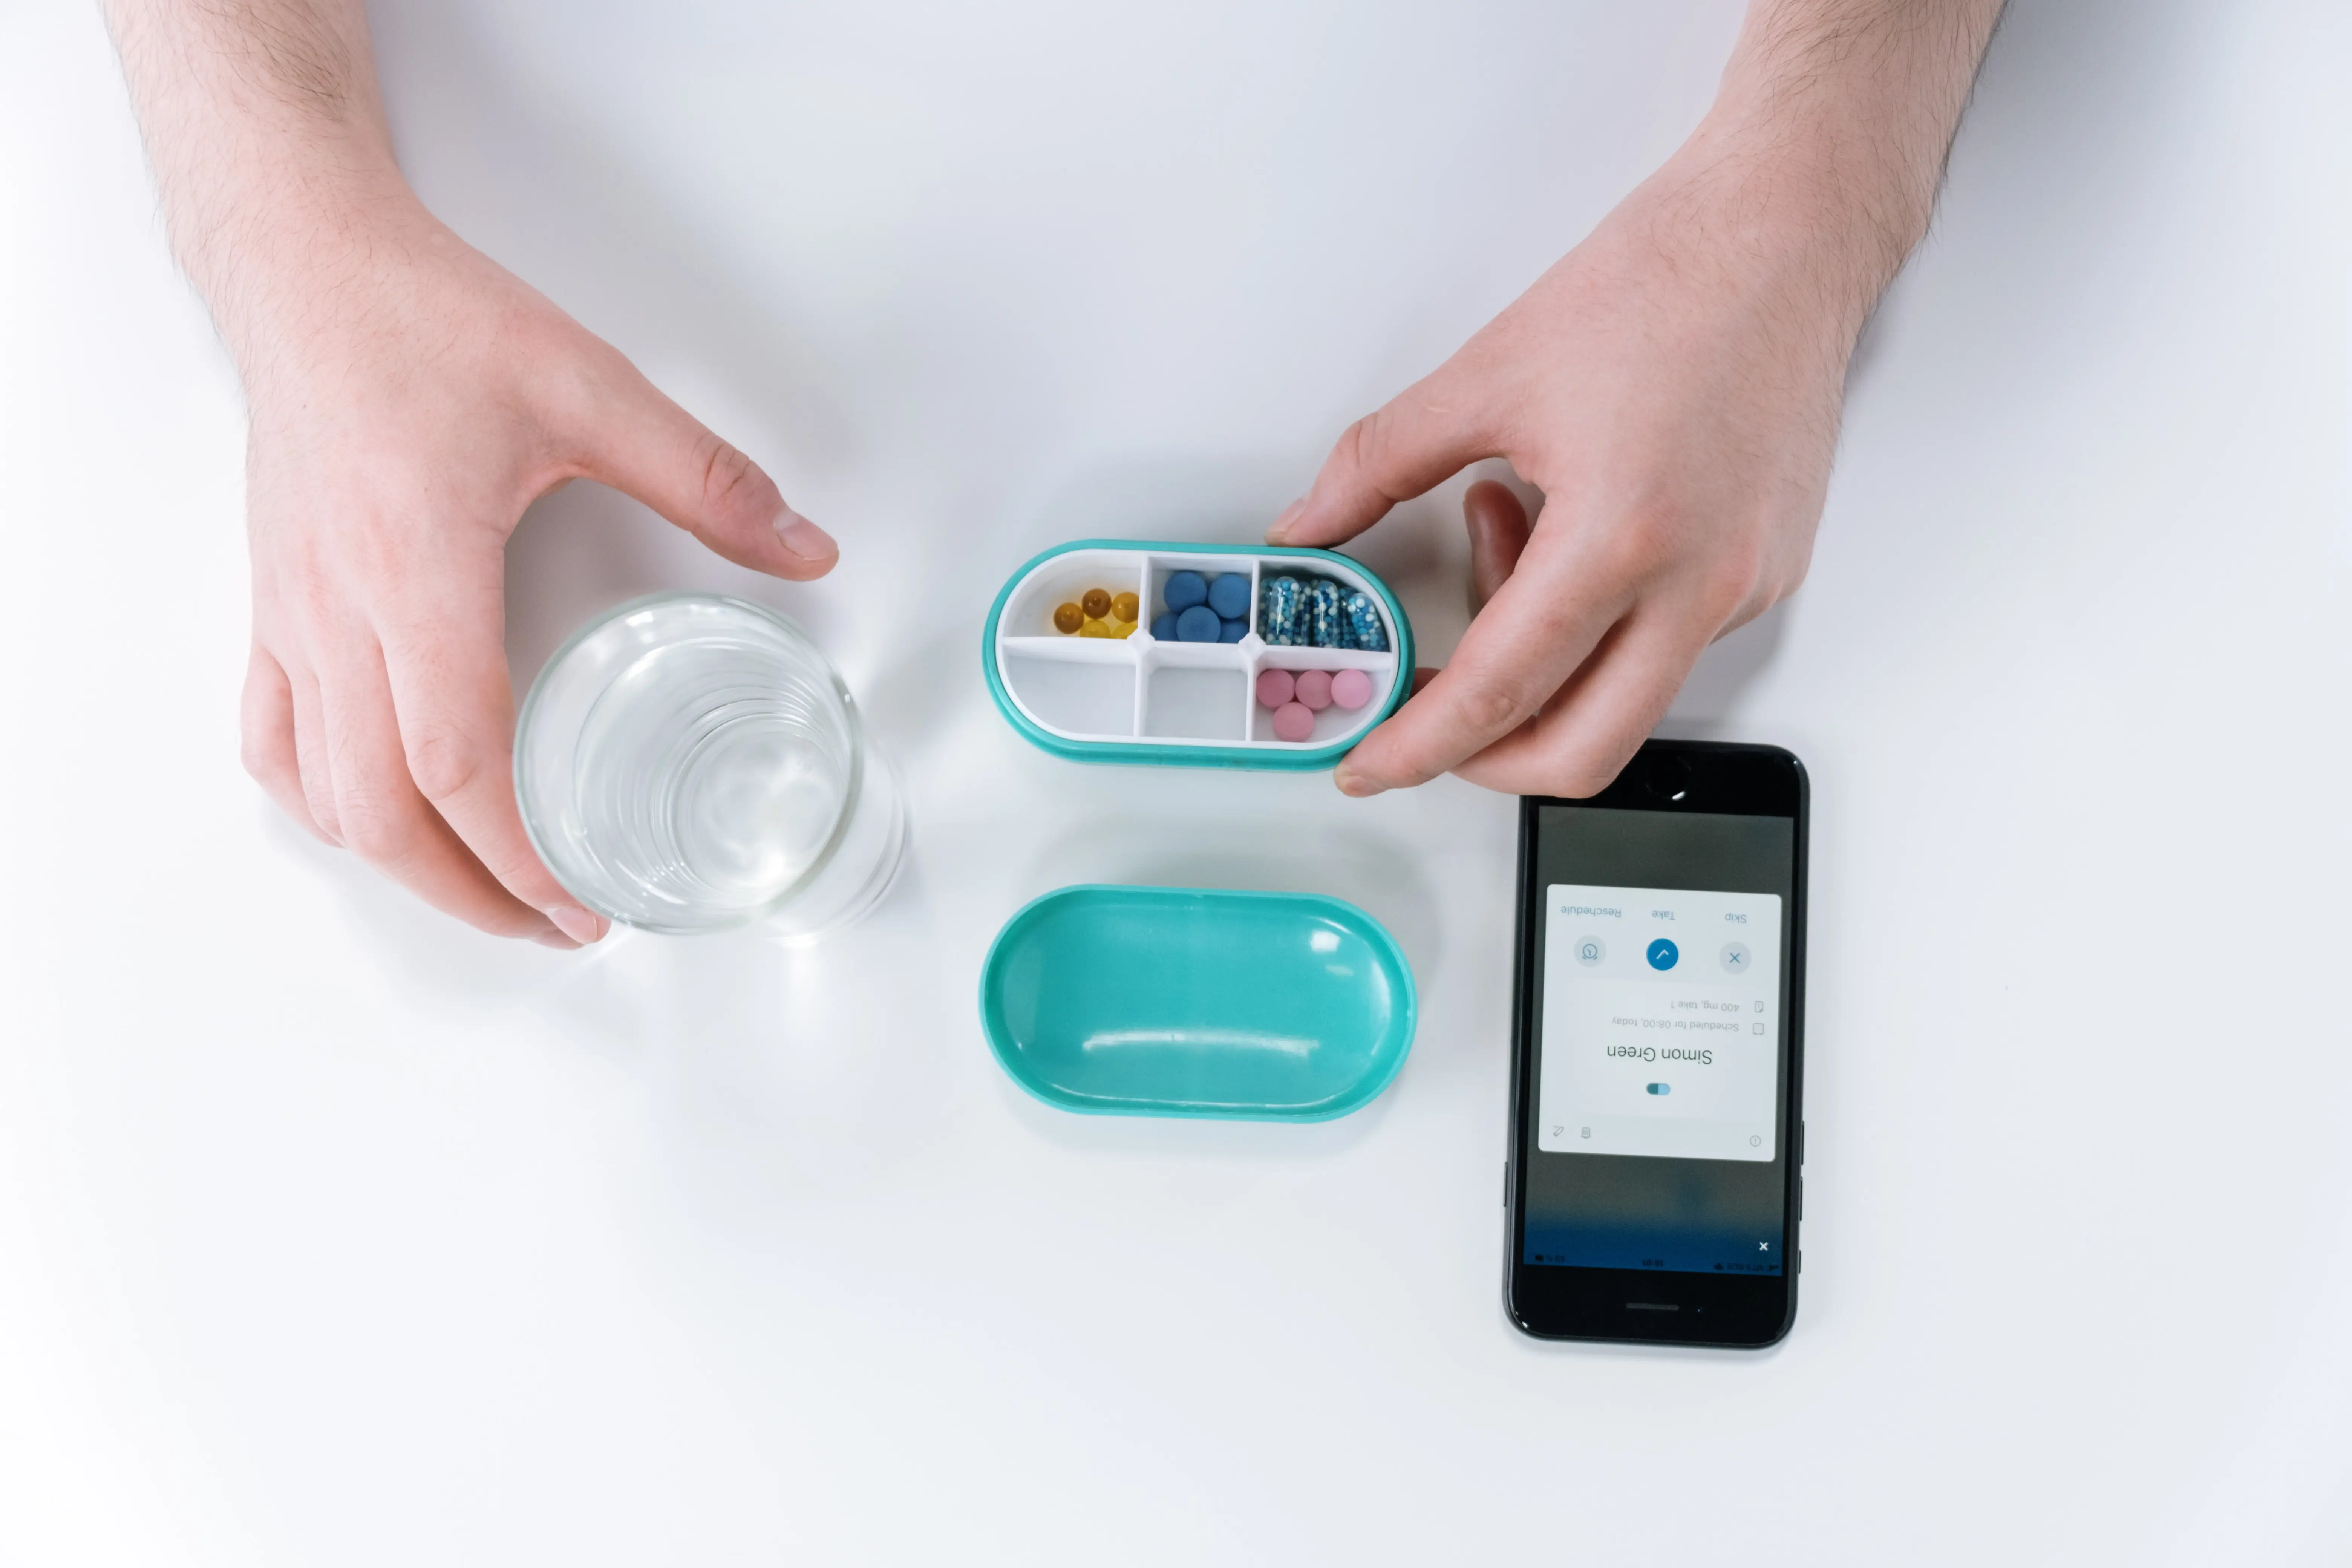 Medication Management App Development: 6 Factors You Need To Consider Before Building an App 3